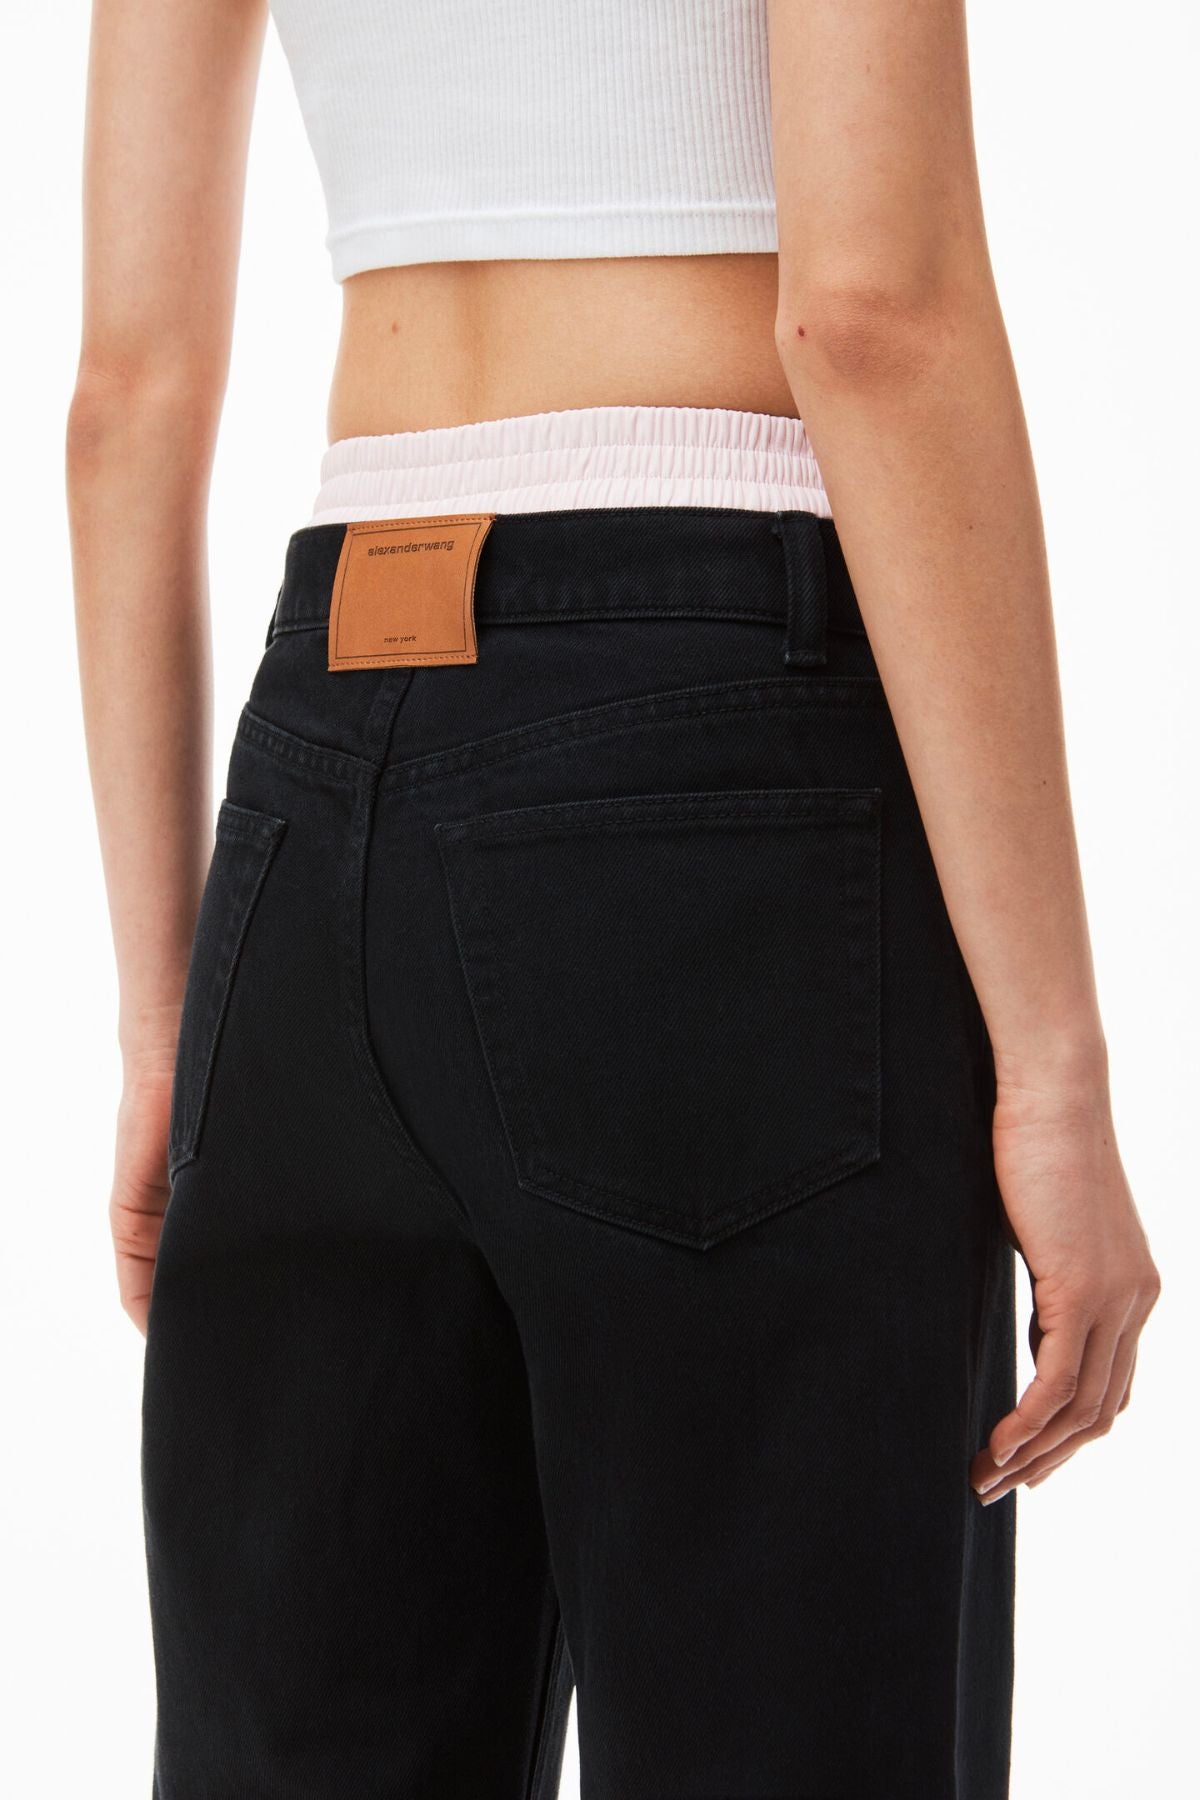 Alexander Wang EZ Mid Rise Relaxed Straight Jeans - Washed Black